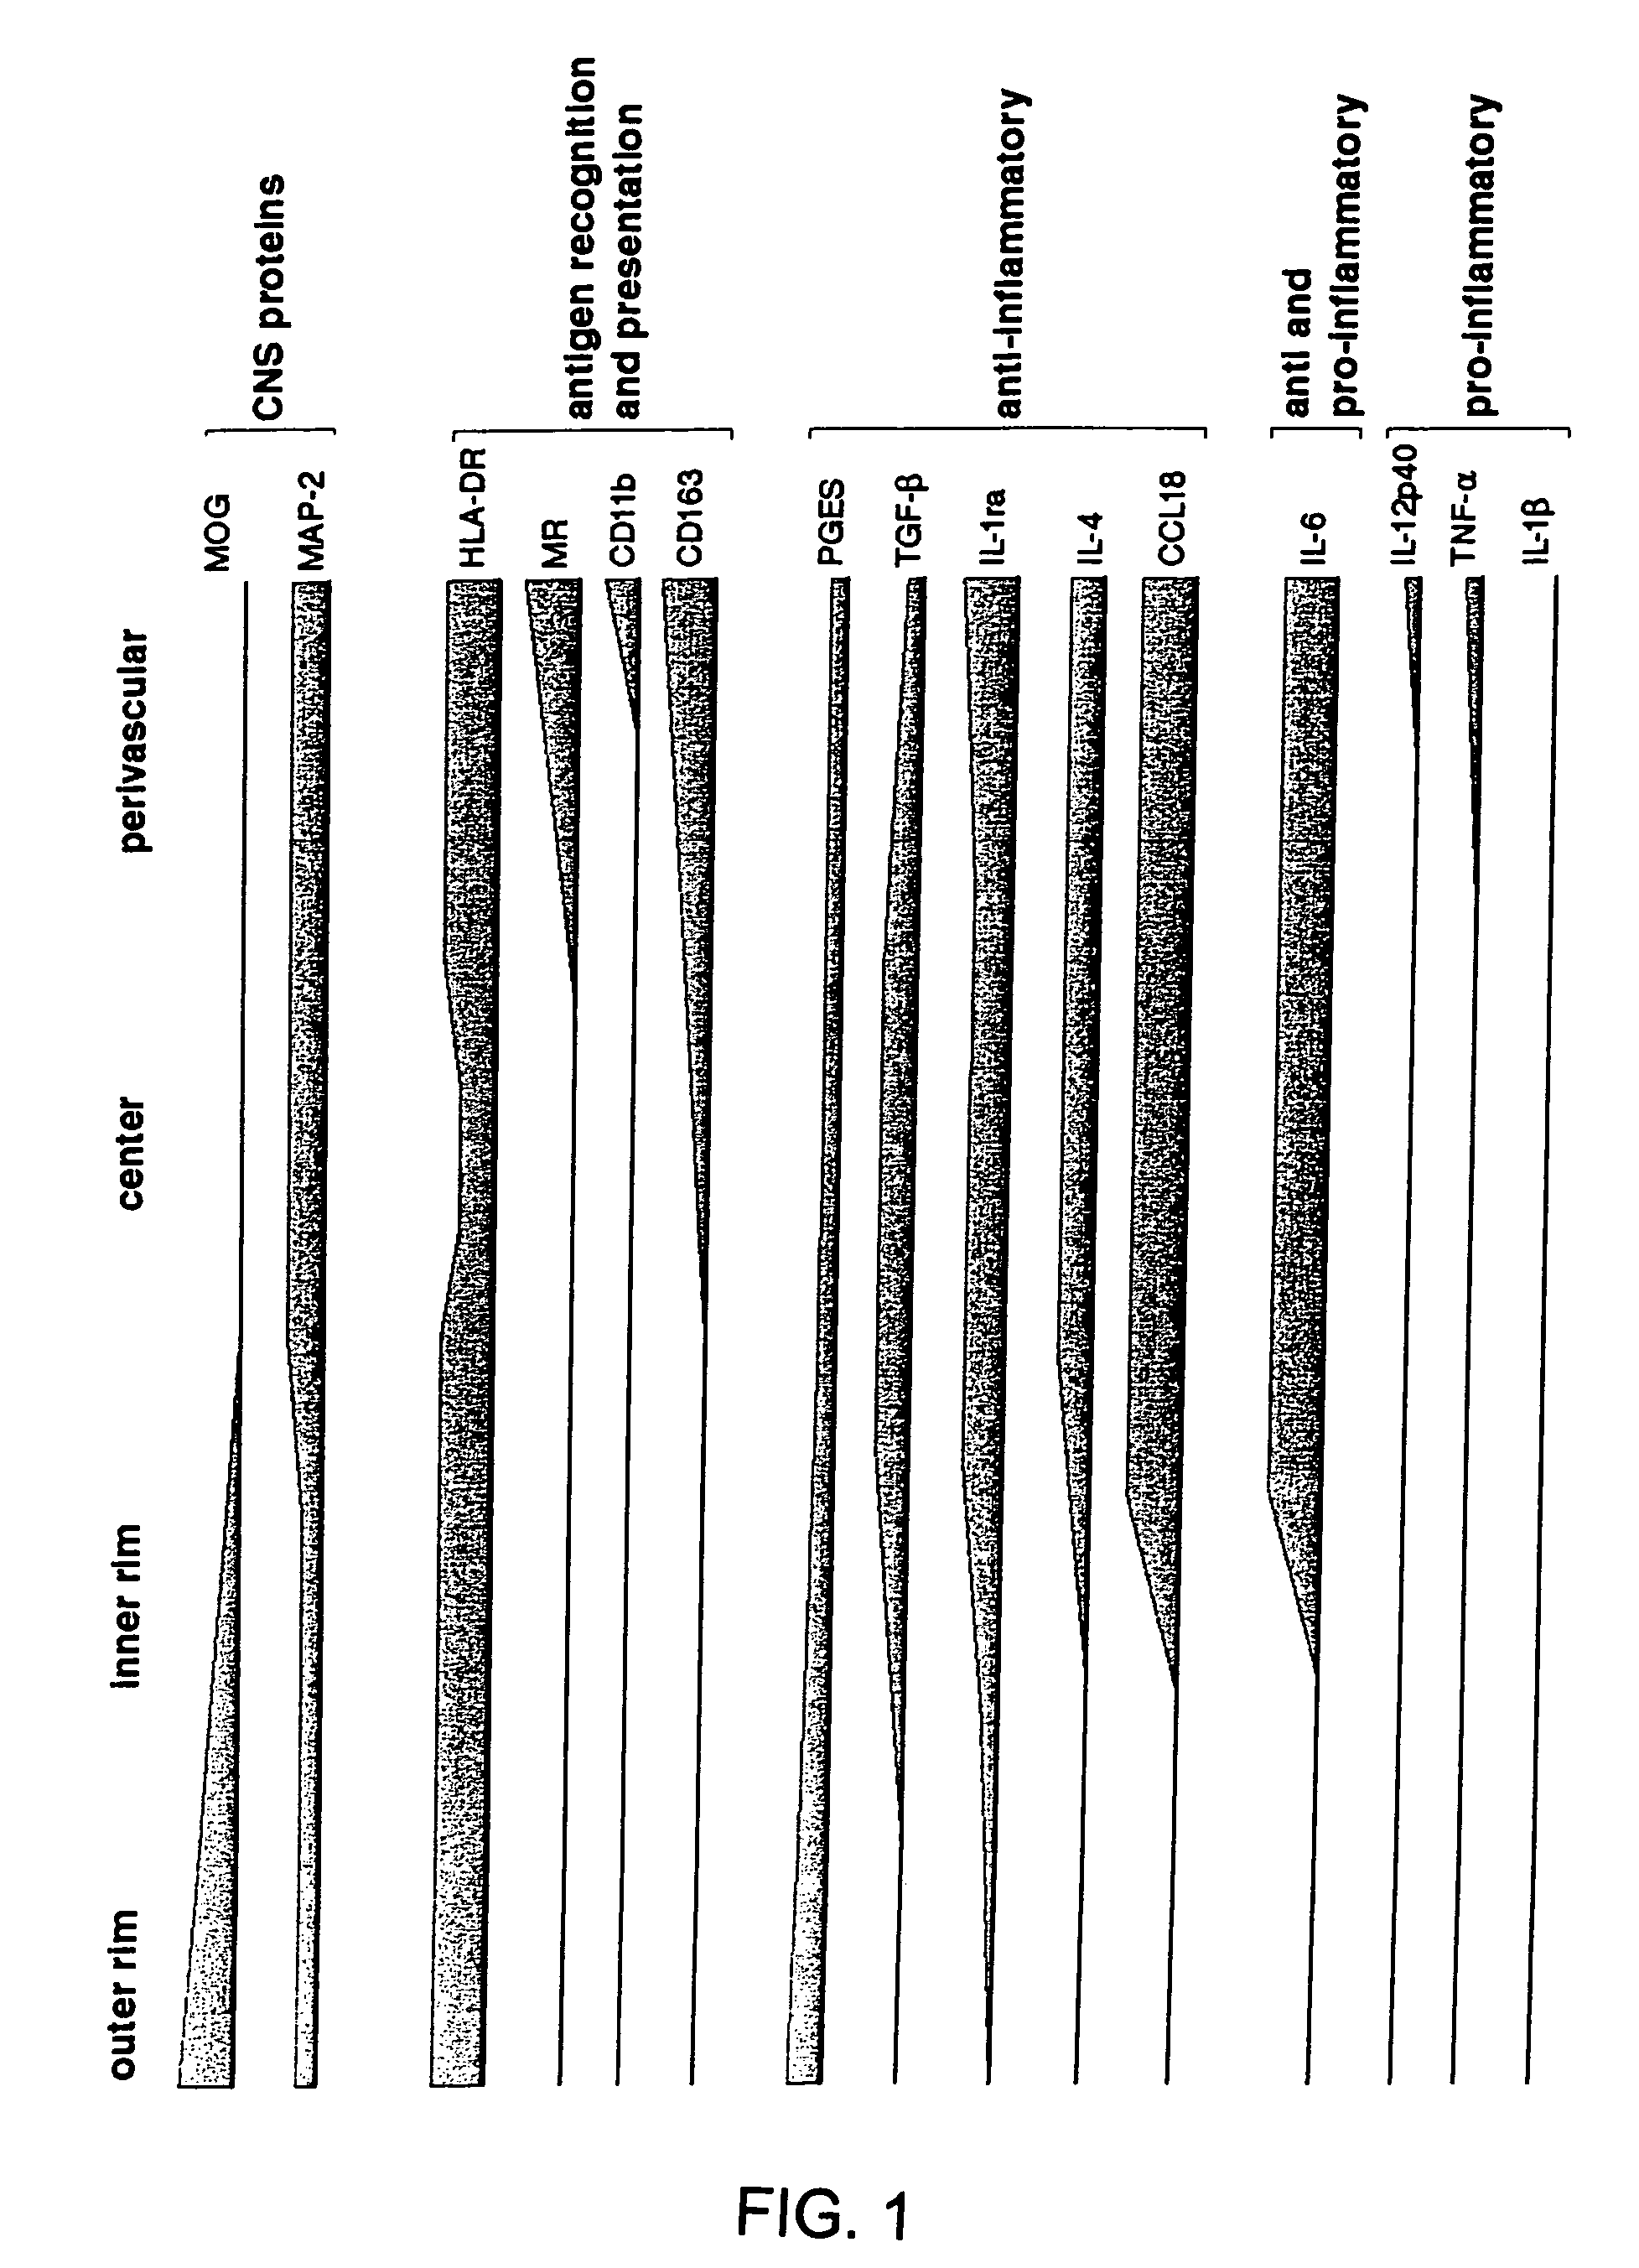 Compounds of therapeutic value in the treatment of multiple sclerosis and other diseases wherein foamy cells are involved in the disease etiology